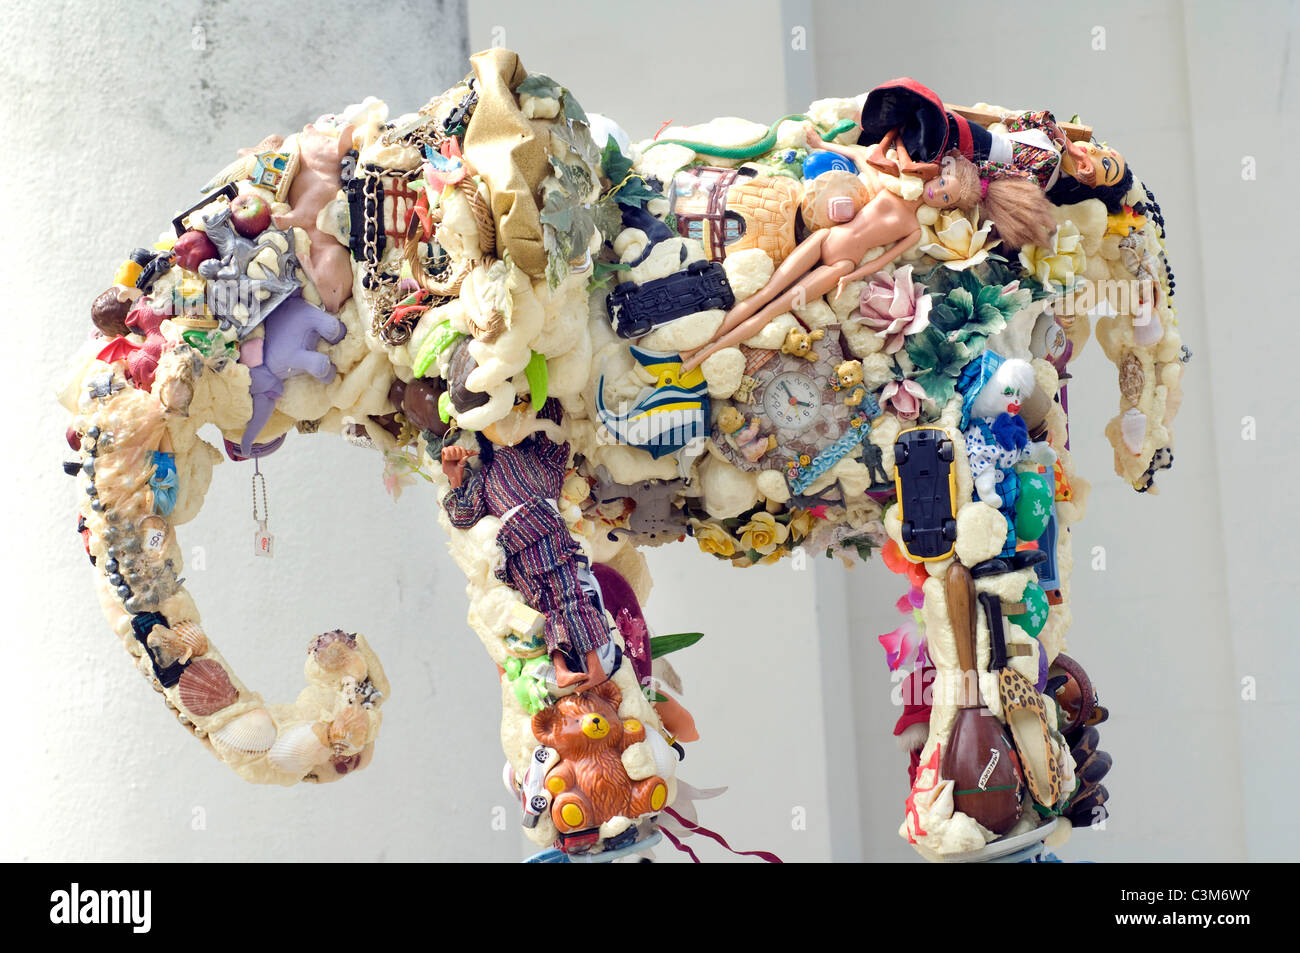 Sculptor Anthony Heywood's sculpture 'Earth Elephant' made from recycled objects. Stock Photo